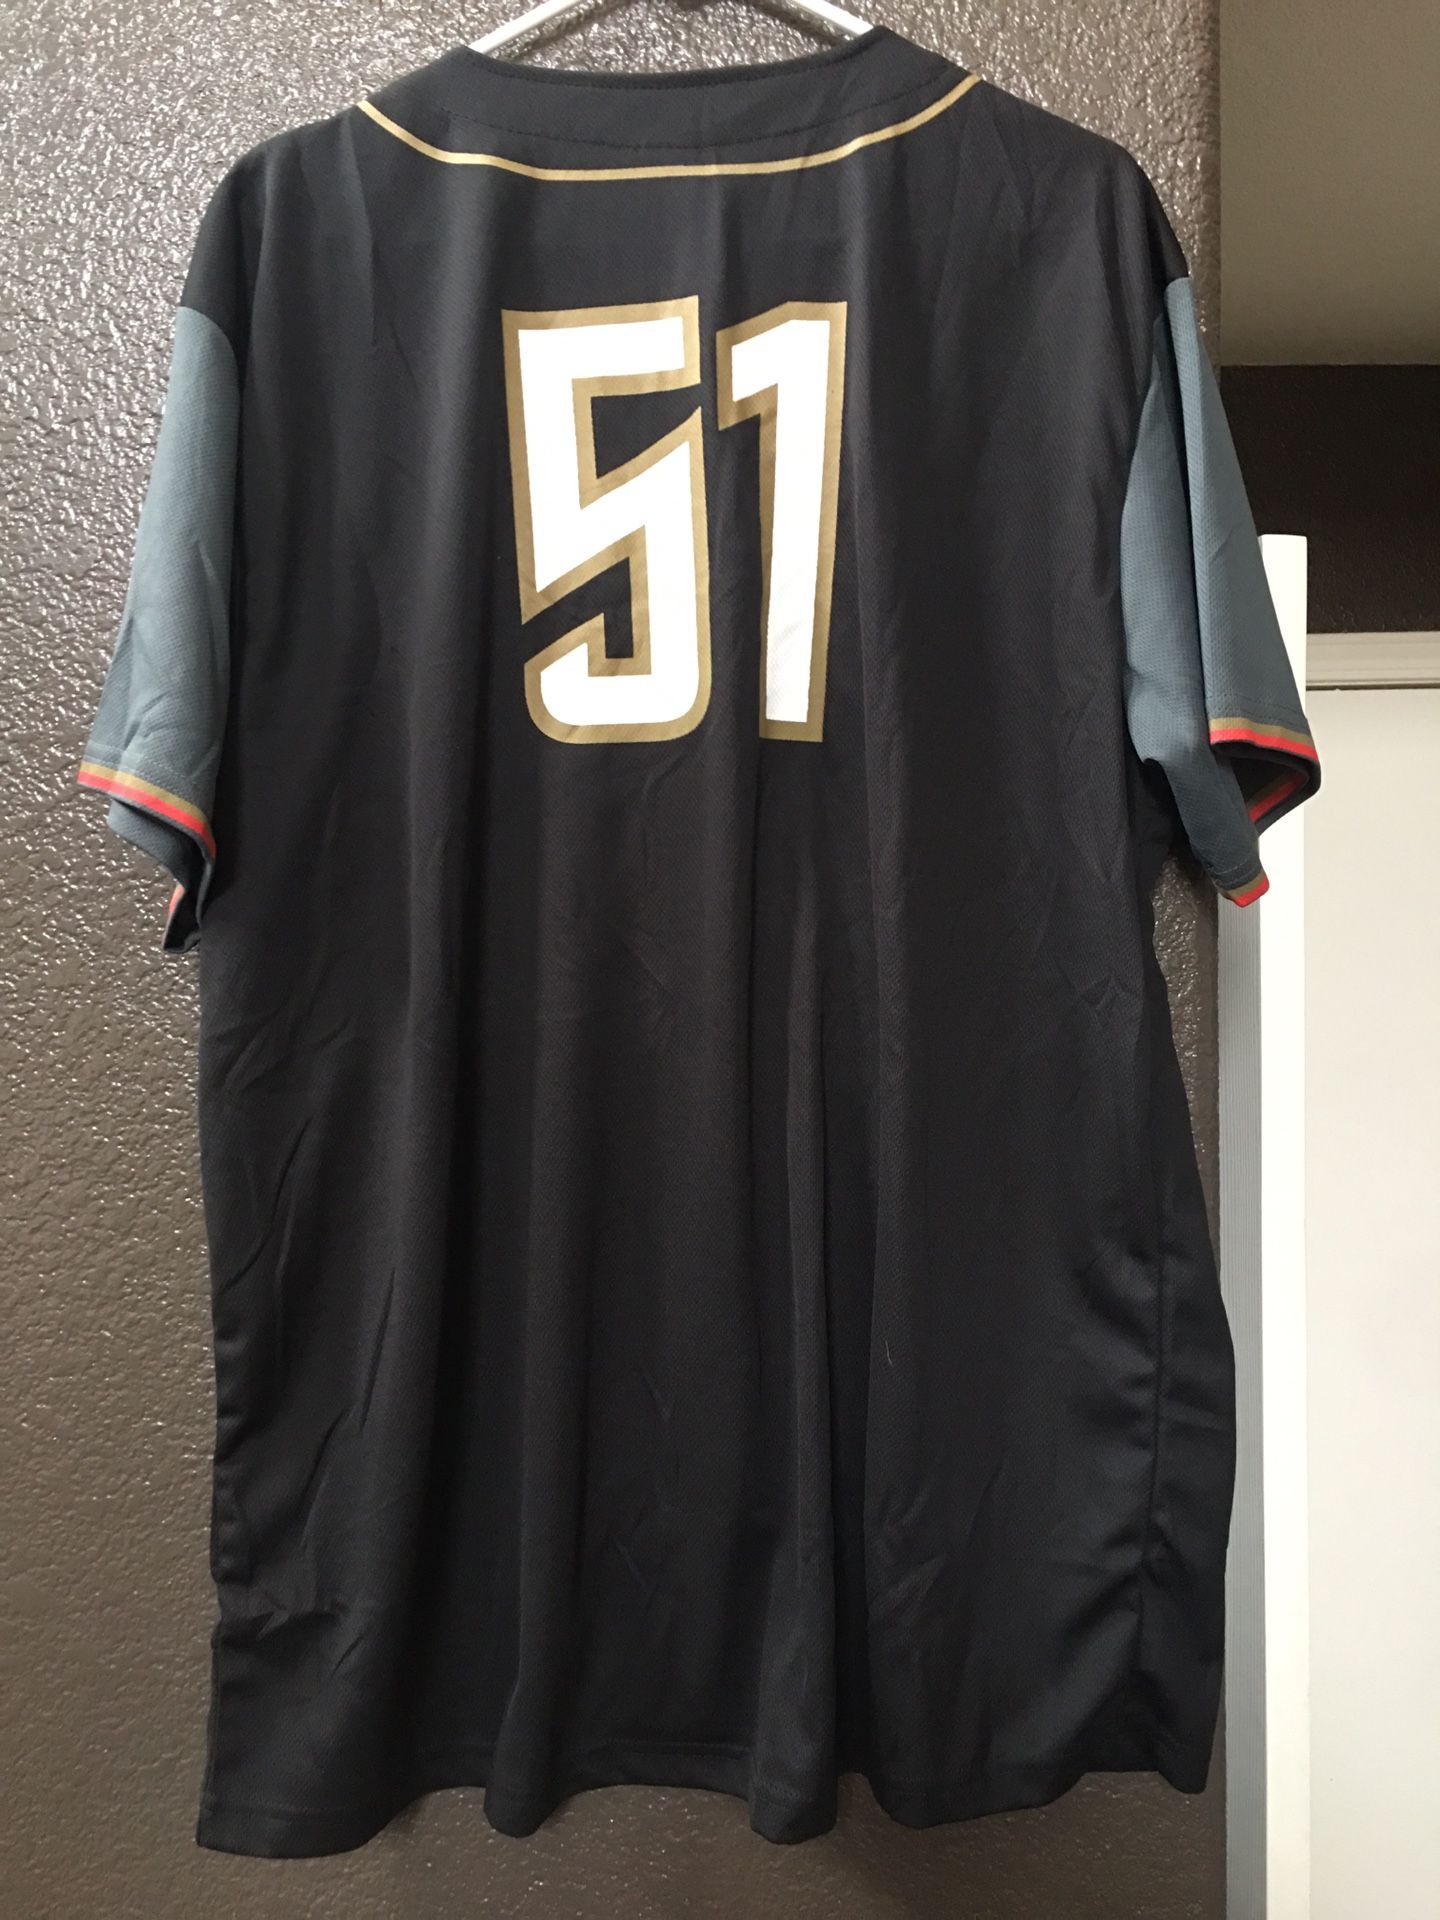 Knights Jersey New for Sale in Las Vegas, NV - OfferUp